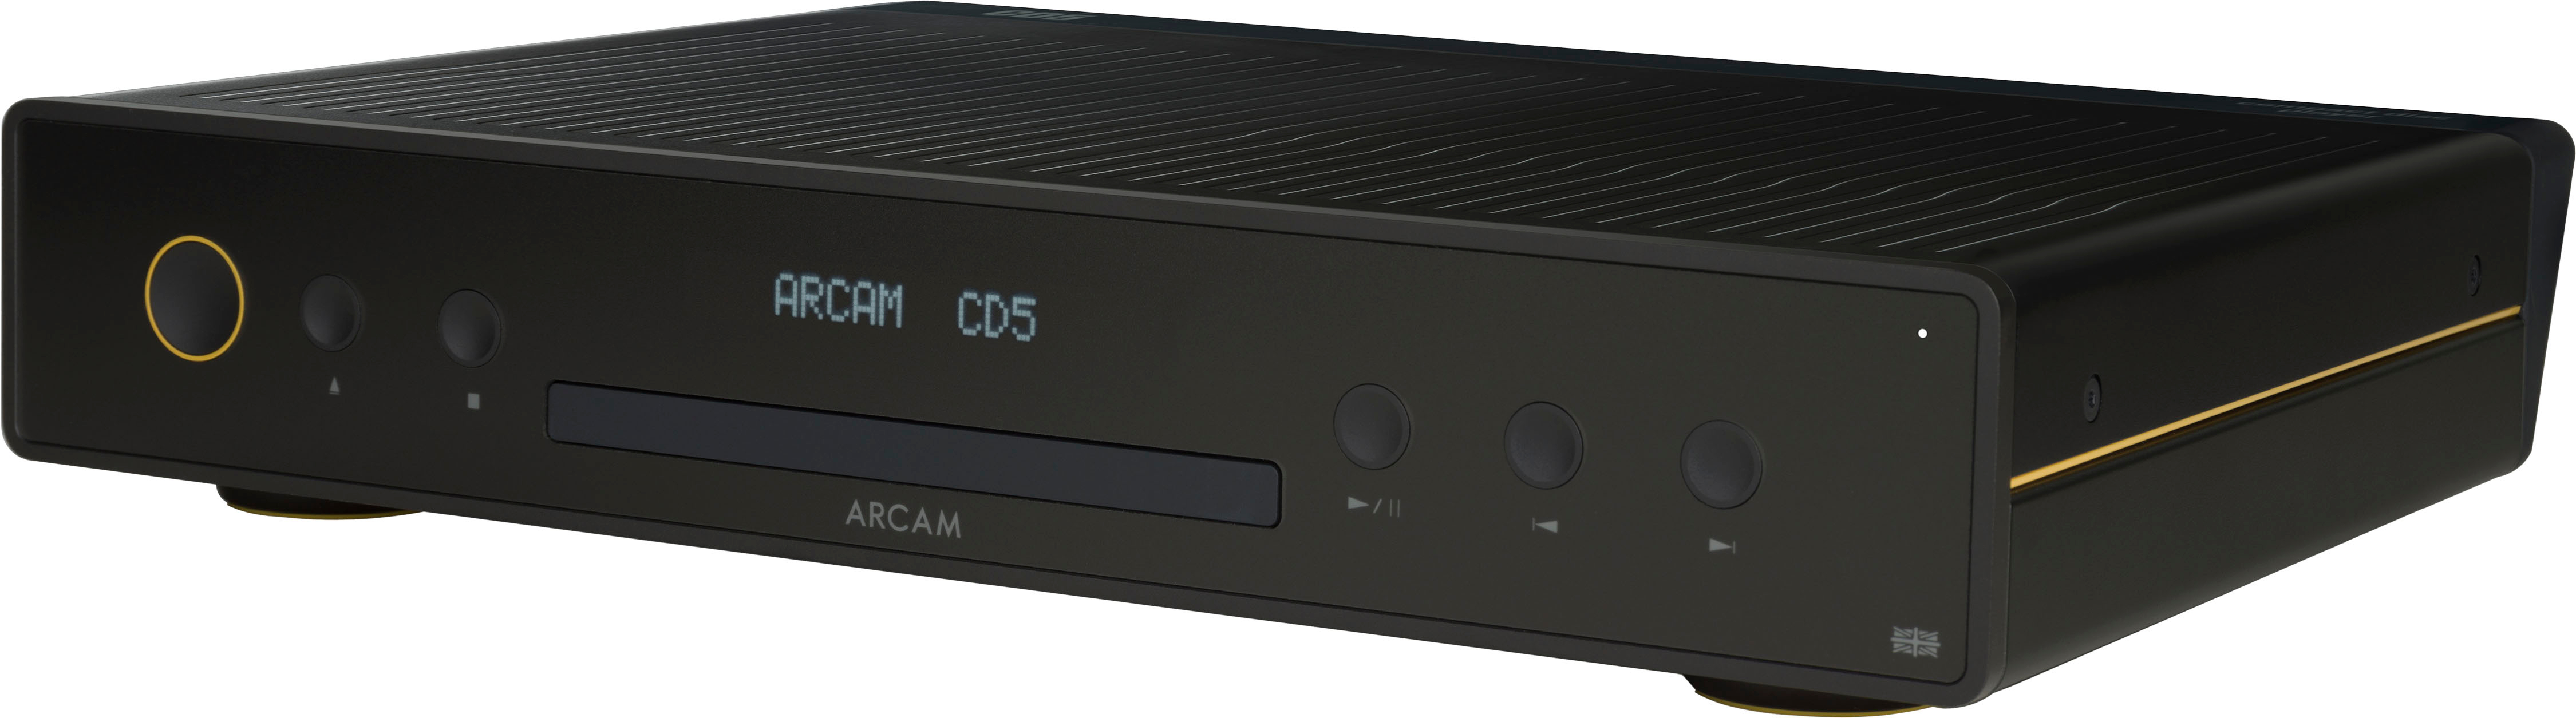 Left View: Arcam - CD5 Compact Disc Player - Black